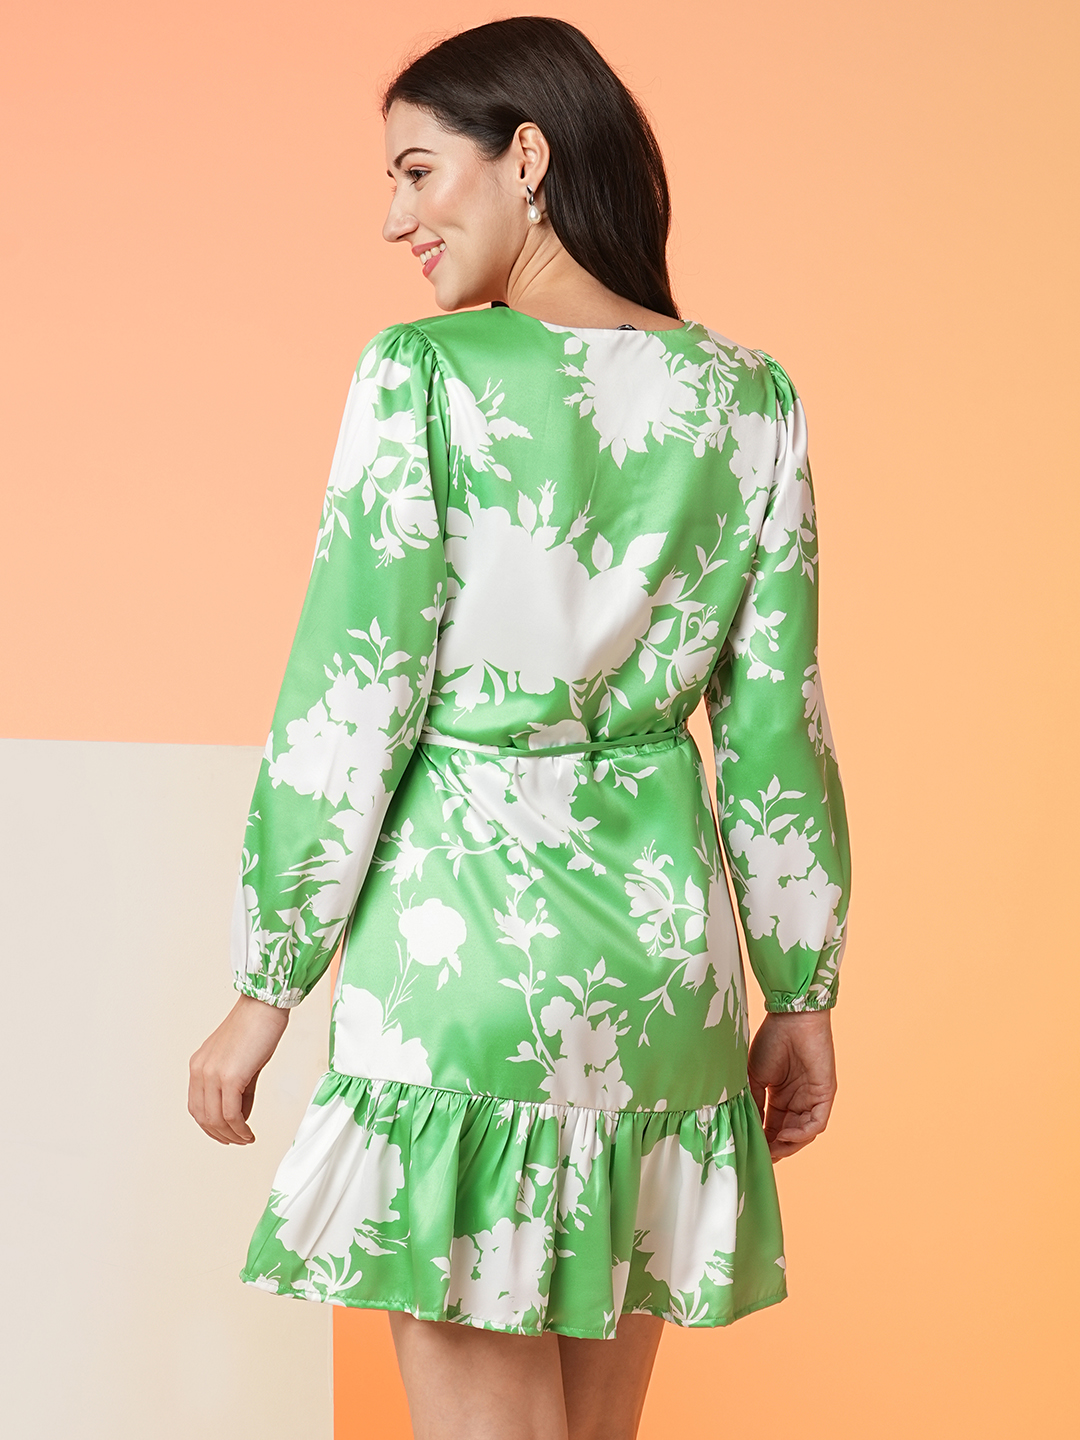 Globus Women Green Floral Fit & Flare Party Dress